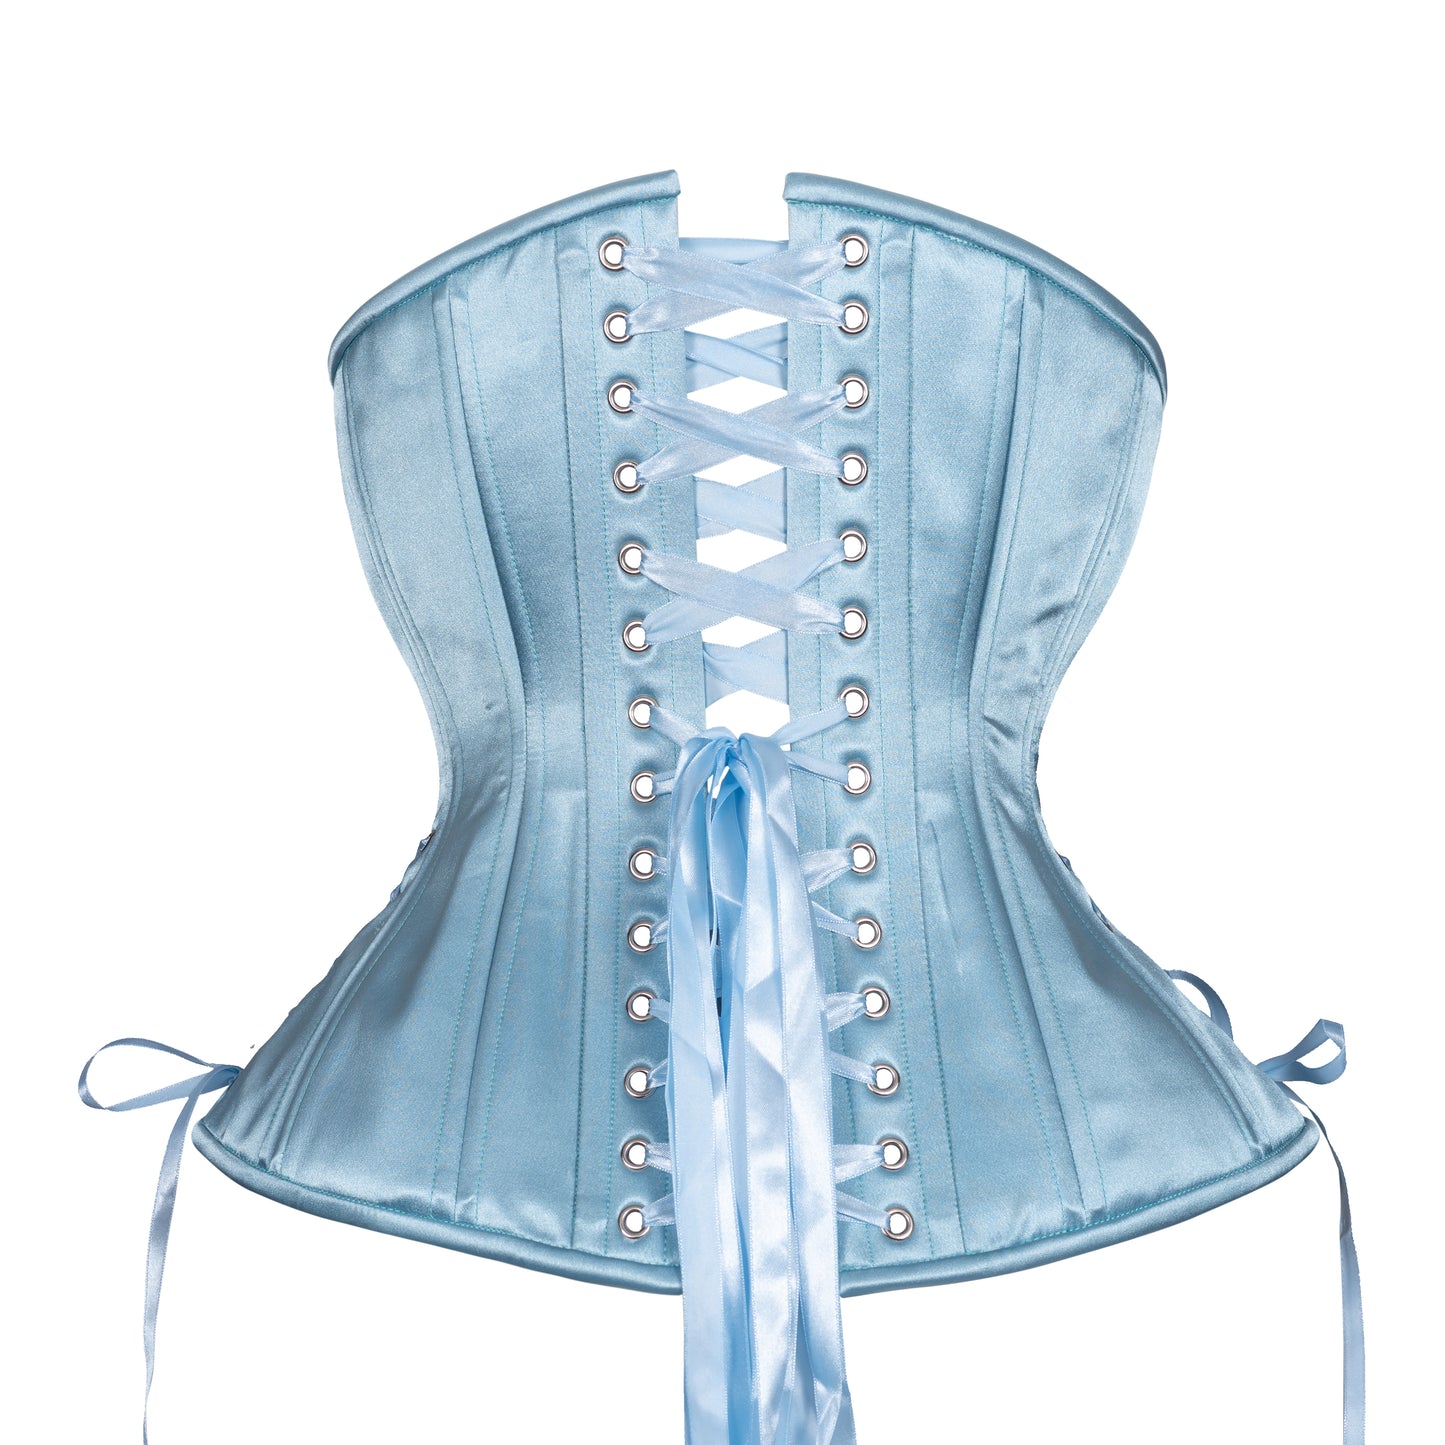 Steely Blue Satin Corset, Hourglass Silhouette, Long